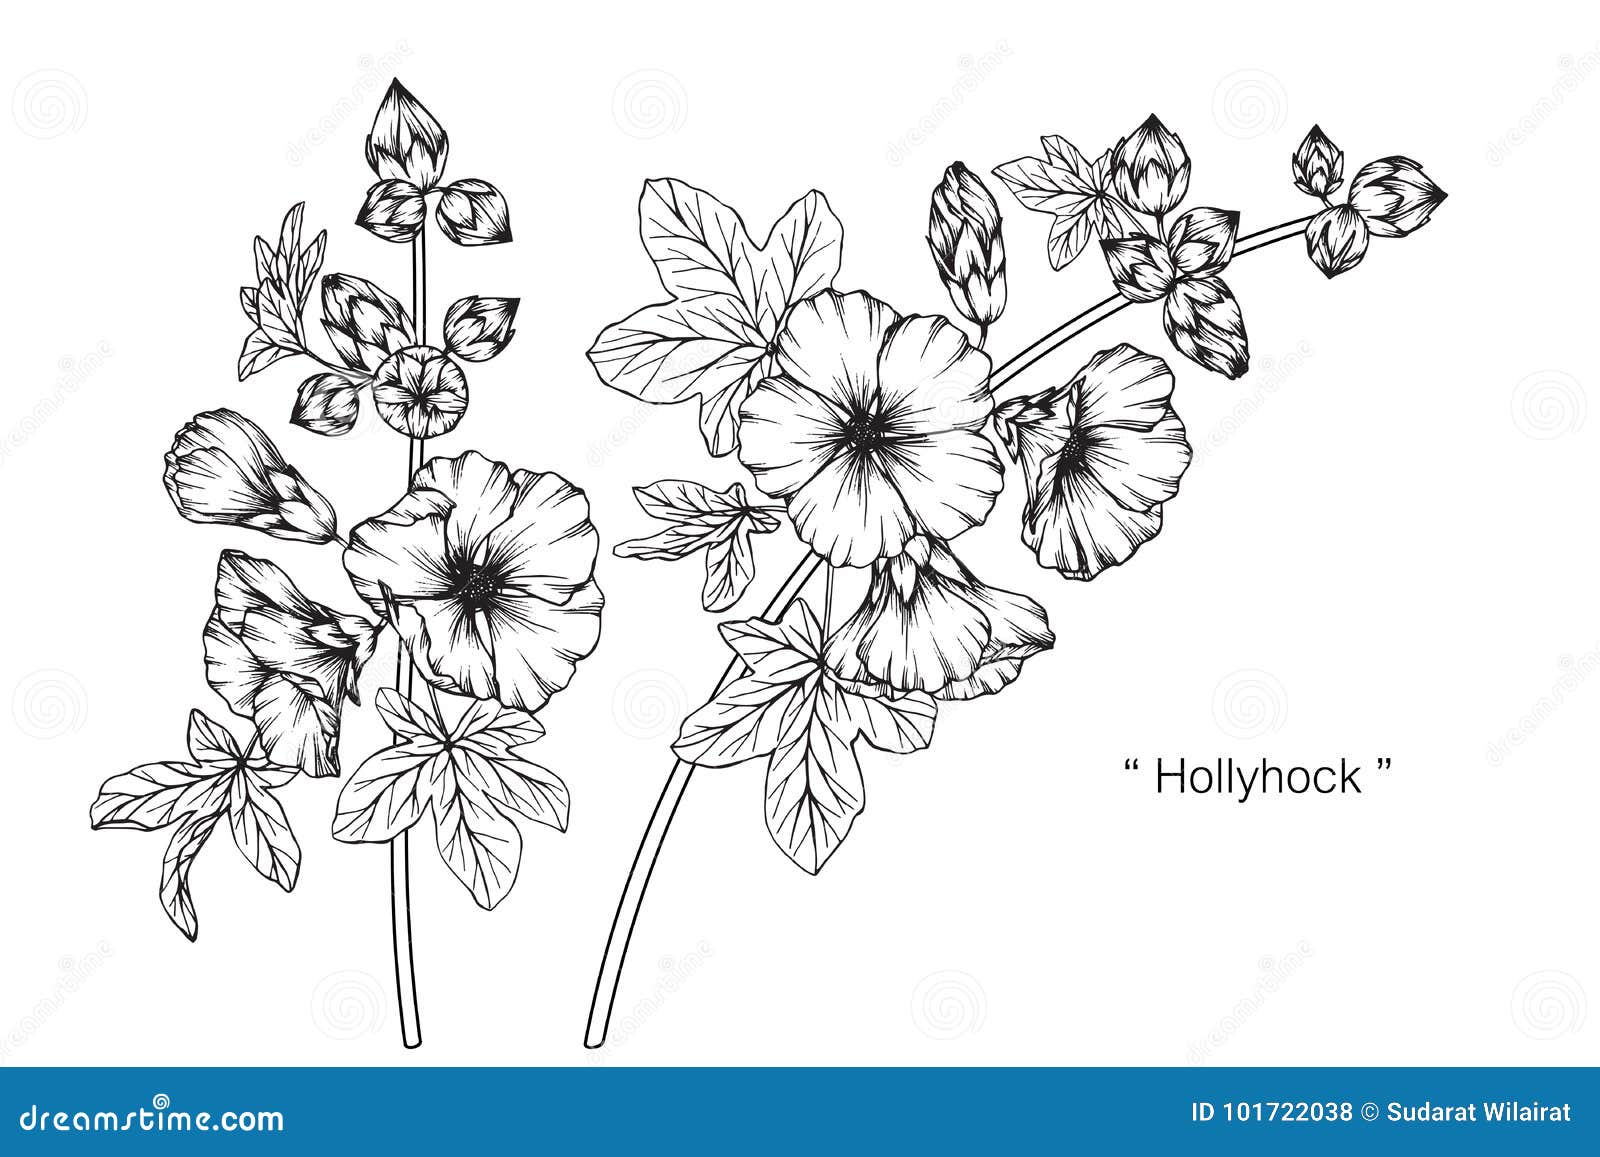 Penny Black Mounted Rubber Stamp 2.75inX5in-Hollyhocks - Bed Bath & Beyond  - 9233271